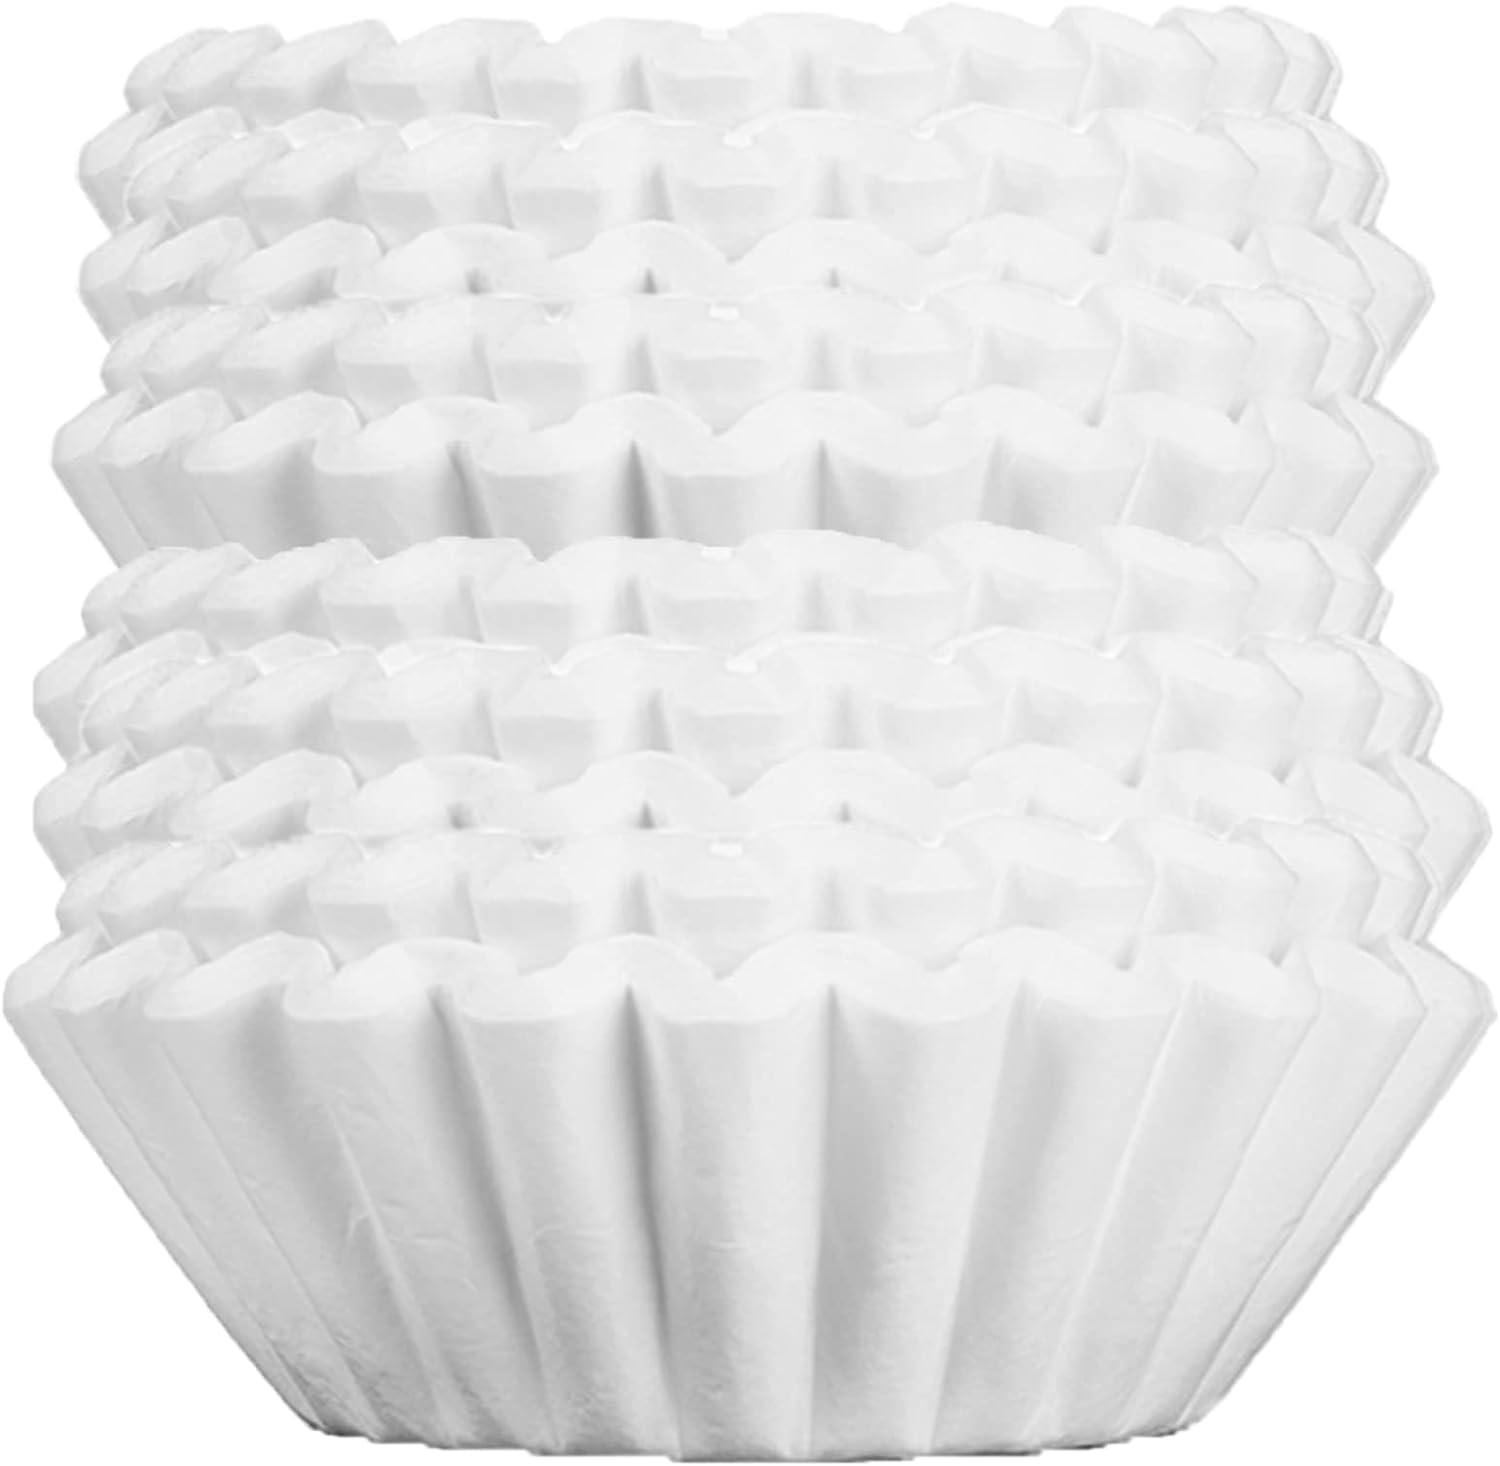 Big Joe® Large Coffee Filters (500 Count) - Tall Walled Commercial Coffee Filters (4 ¼ Inch base, 2 ¾ Inch Walls, 9 ¾ Inch Laying Flat) - Compatible with BUNN and 12-Cup Home  Commercial Machines